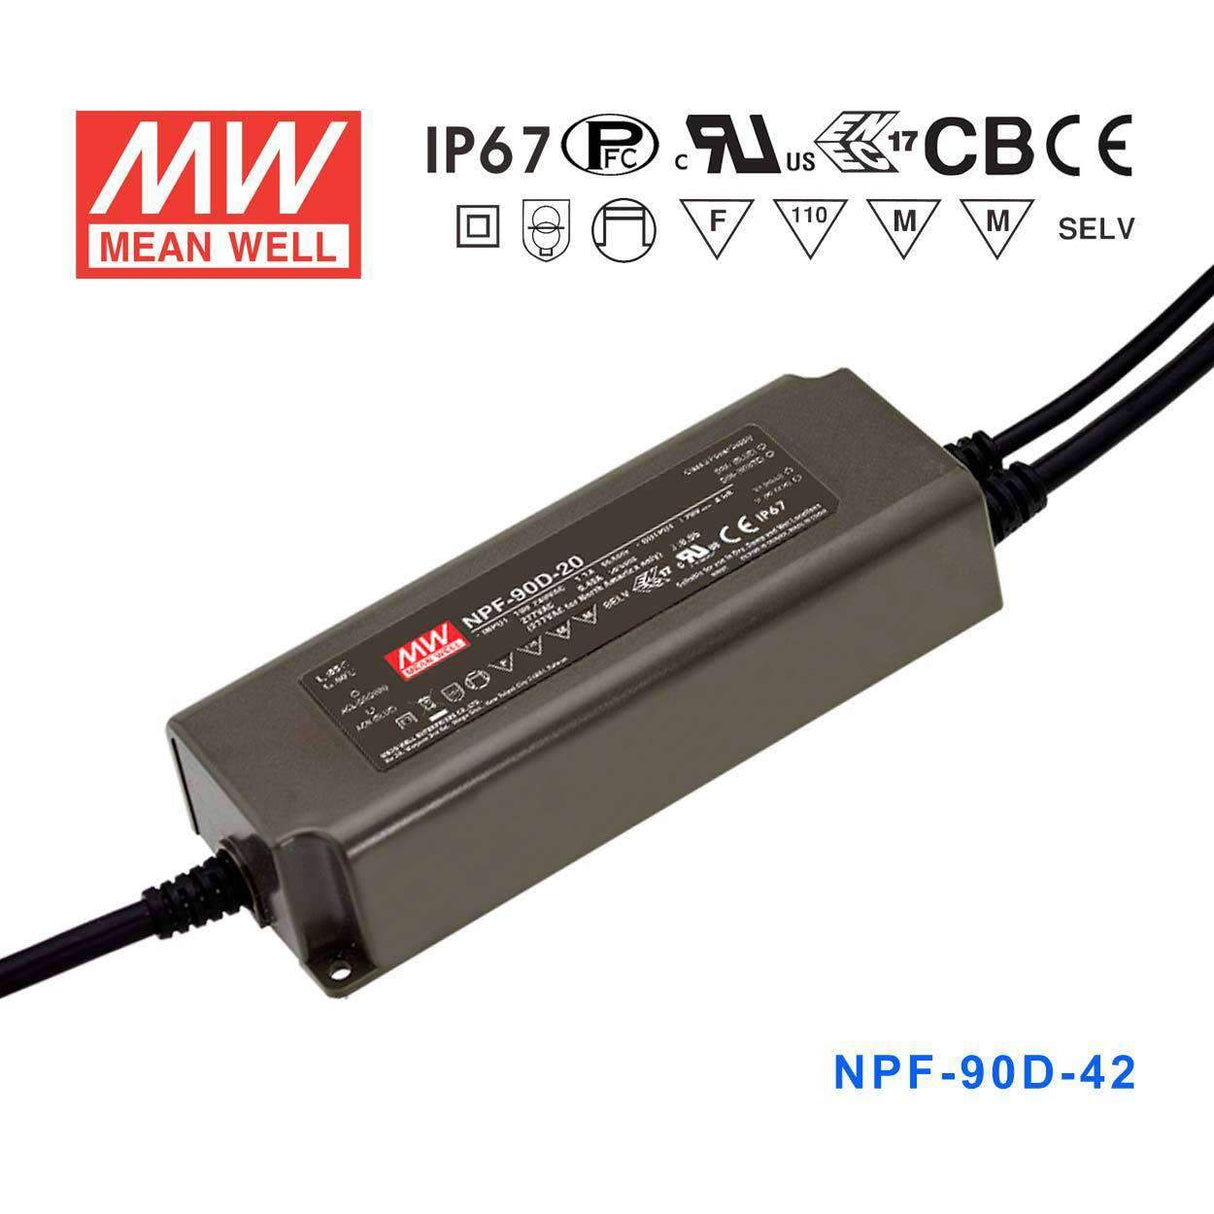 Mean Well NPF-90D-42 Power Supply 90W 42V - Dimmable